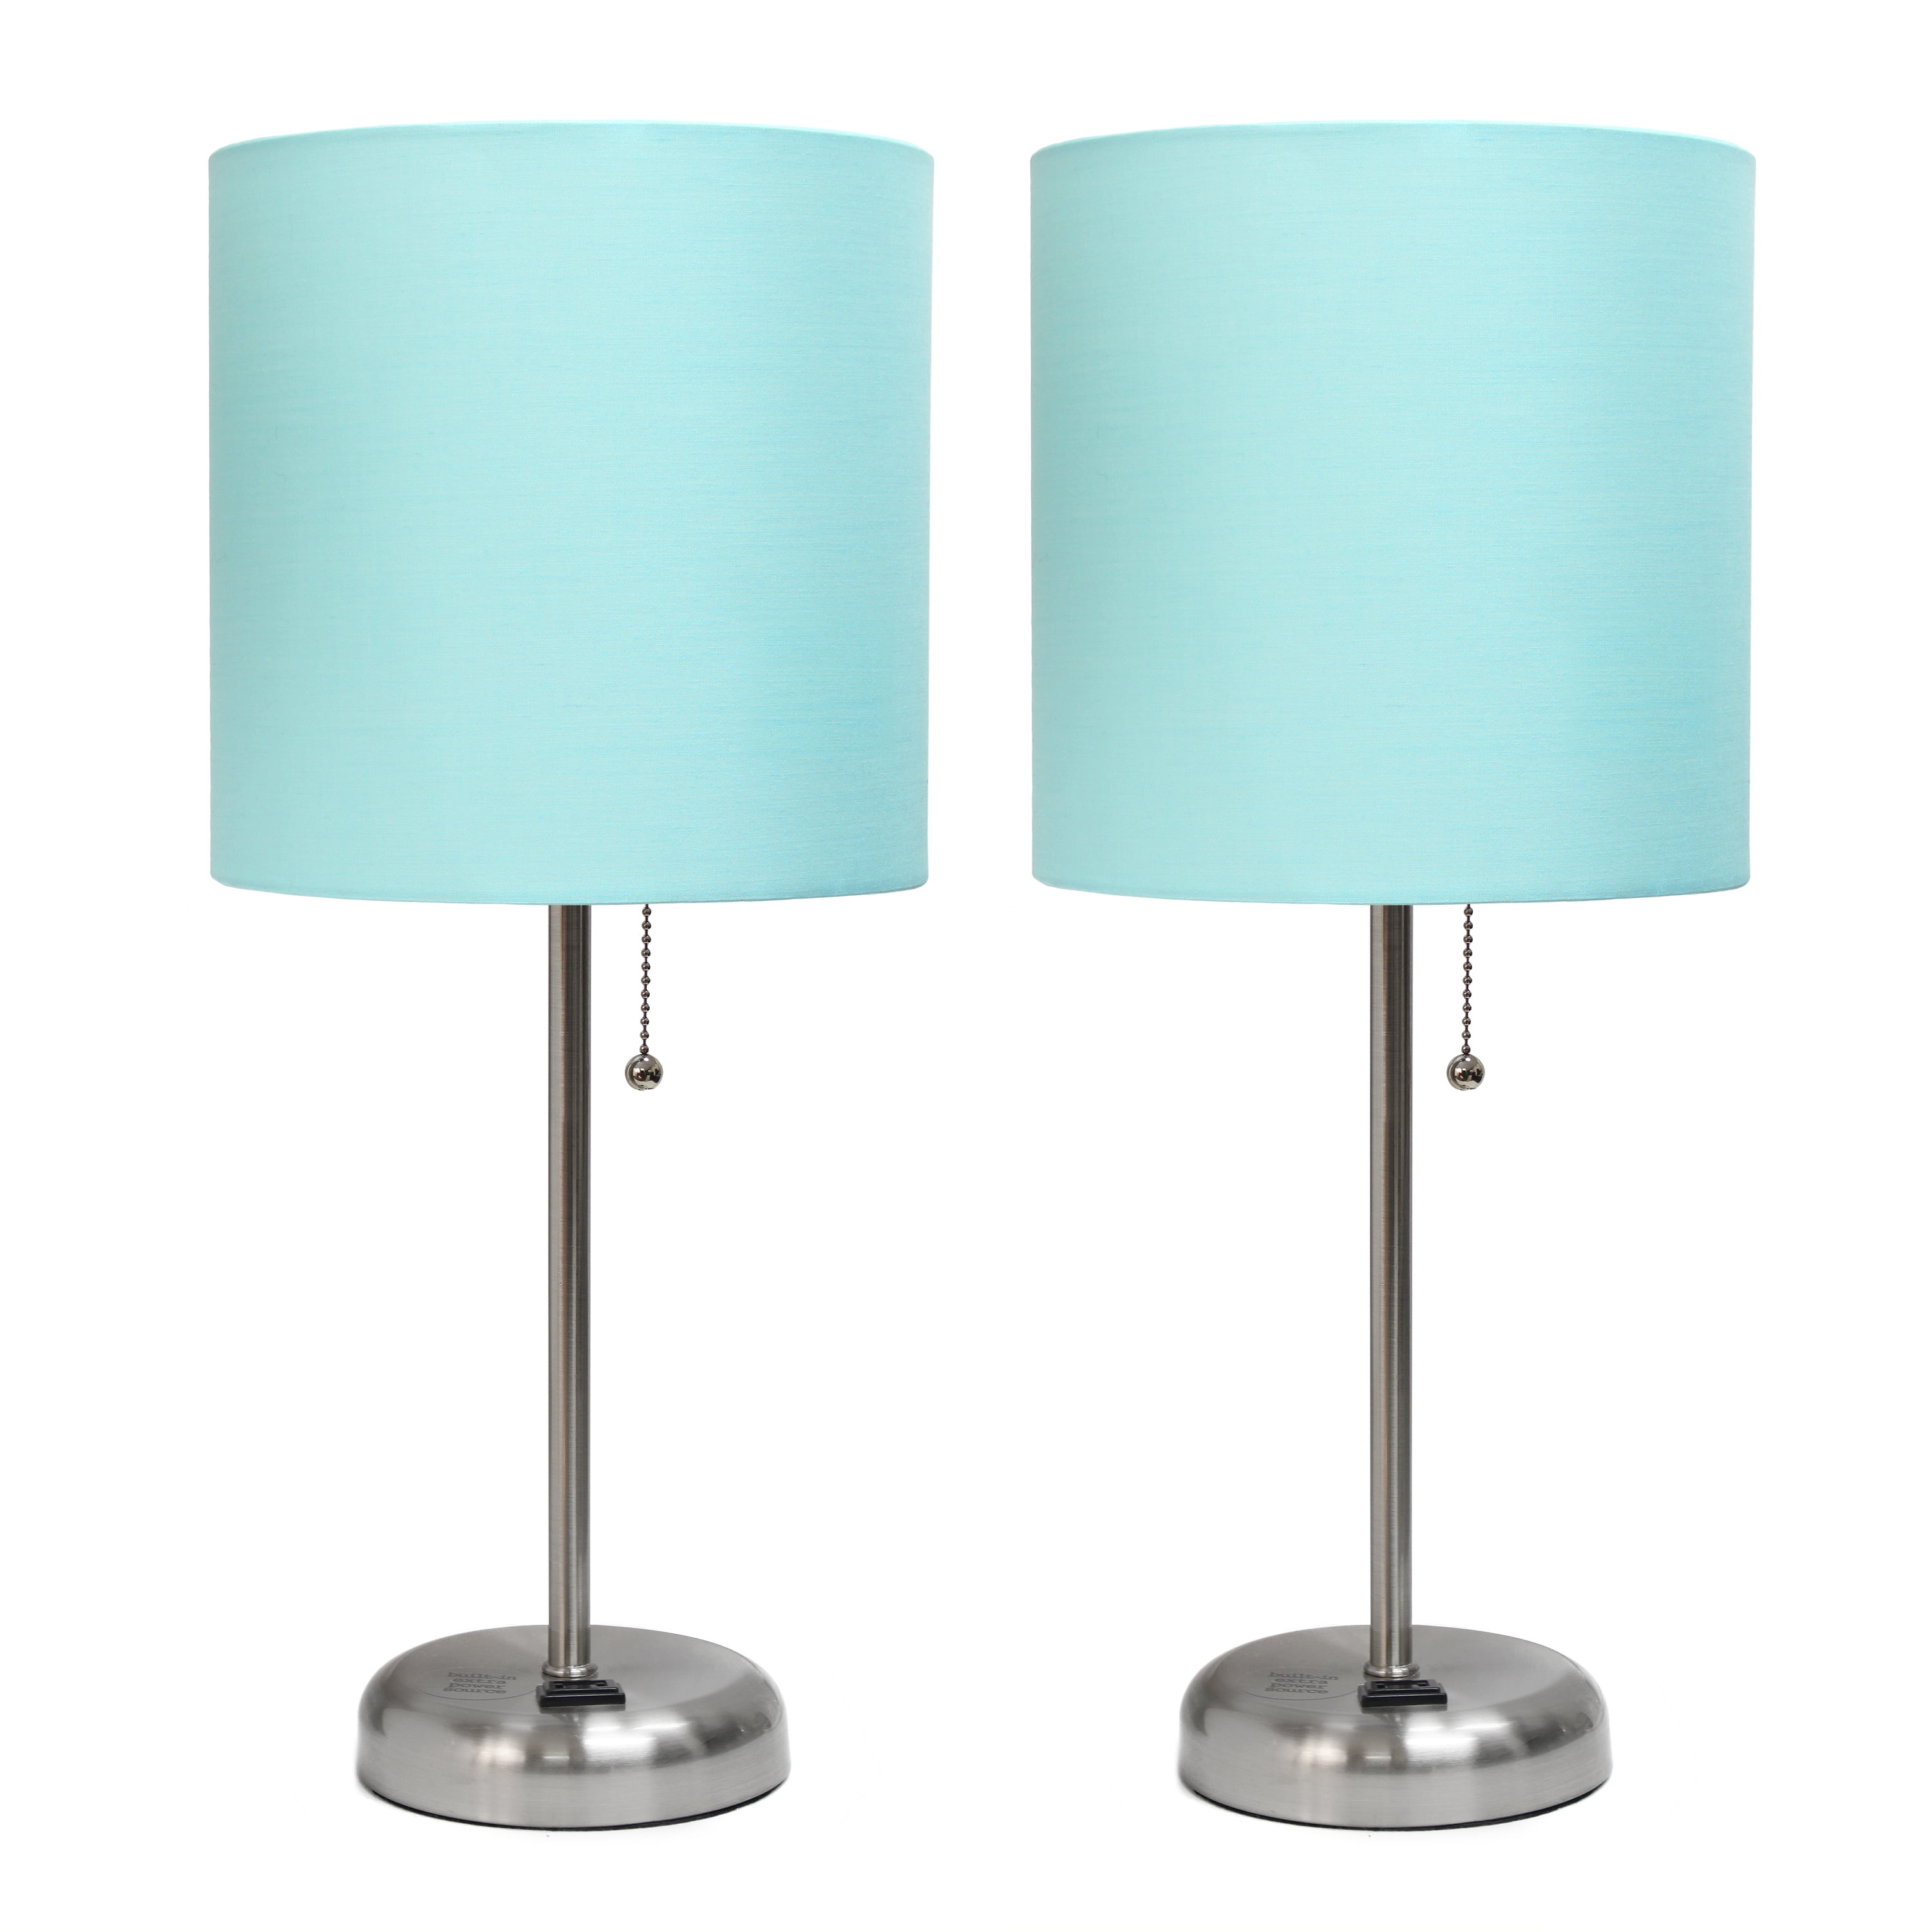 Lc2001-aqu-2pk Brushed Steel Stick Table Lamp With Charging Outlet & Fabric Shade, Aqua - Set Of 2